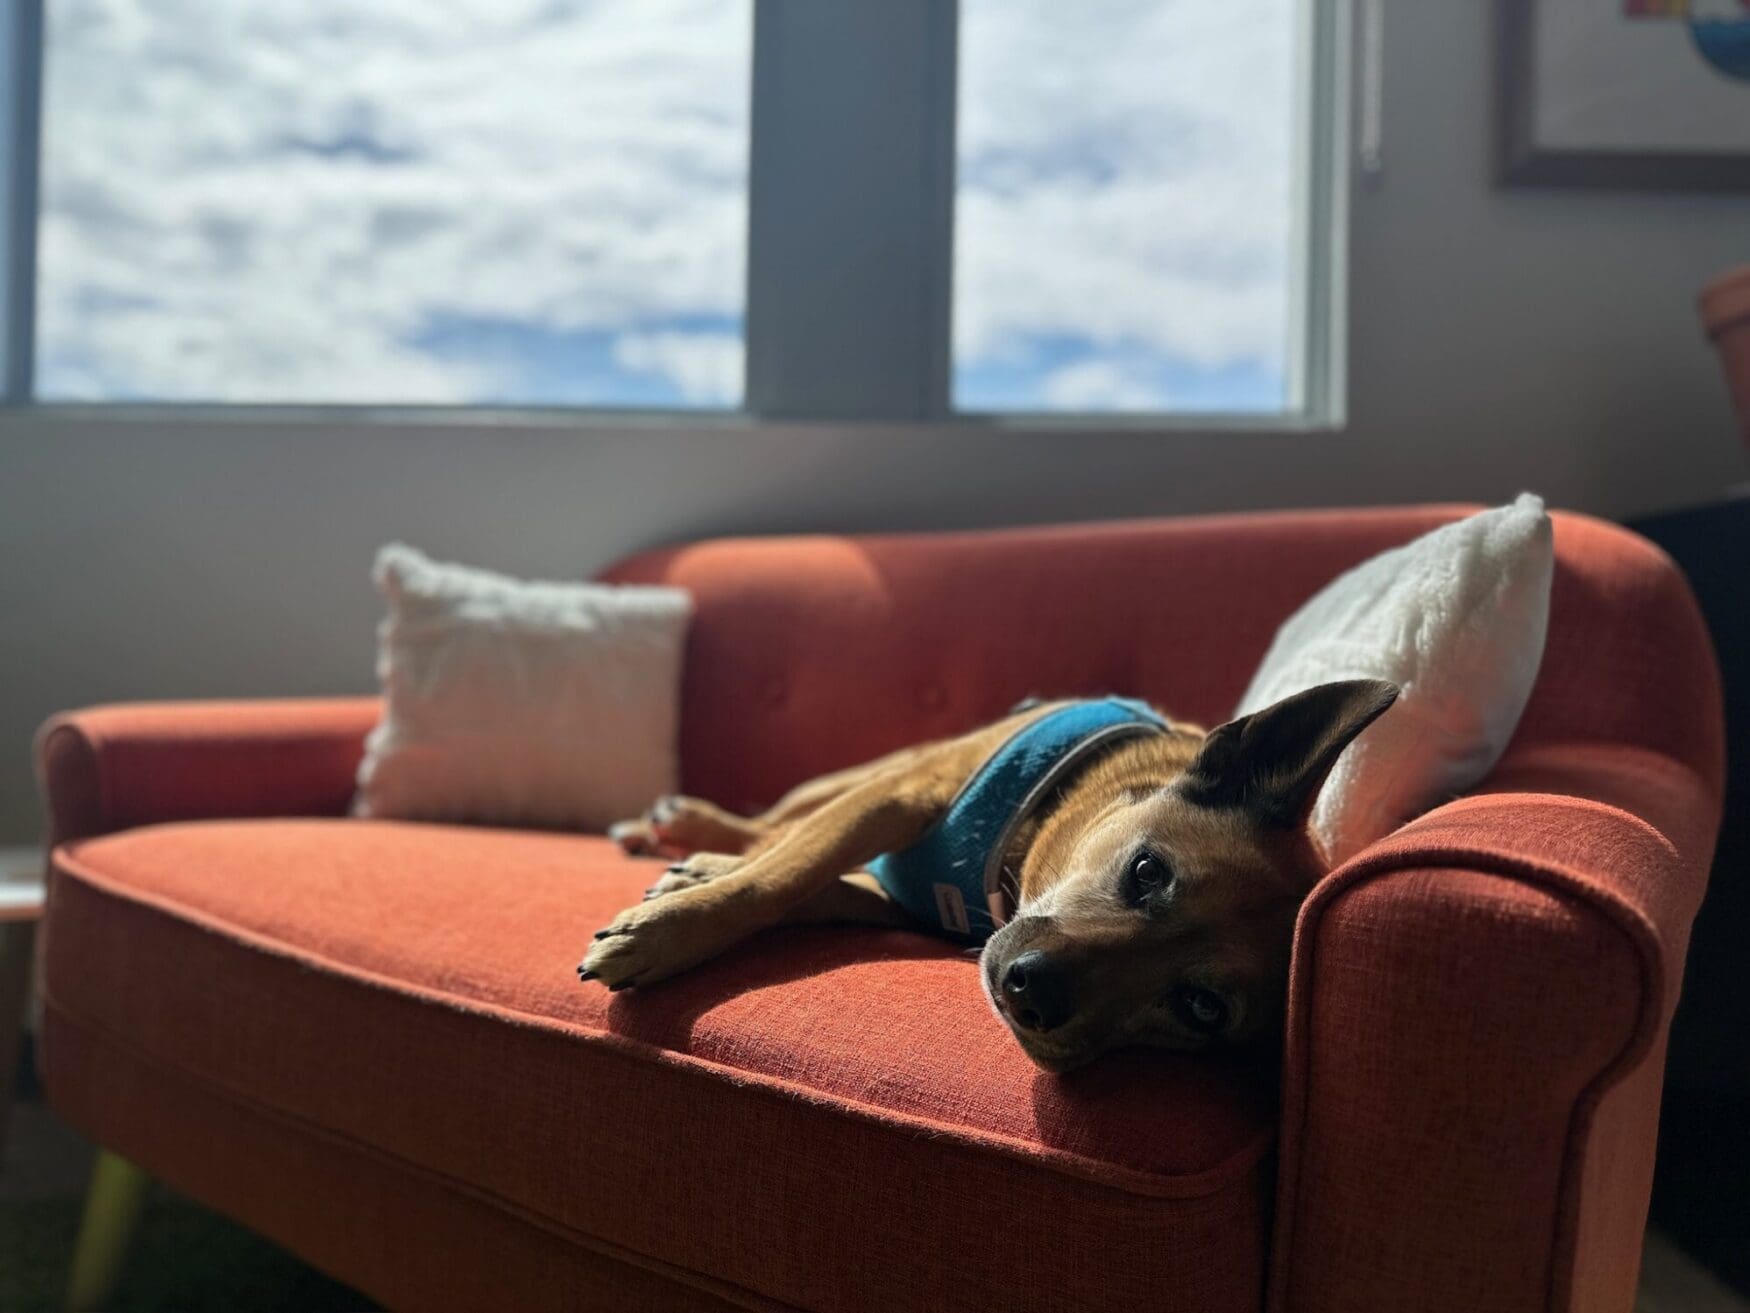 A brown dog with a black muzzle and earnest eyes lies comfortably on a vibrant orange couch, gazing towards the camera. The couch is adorned with two fluffy white pillows. Sunlight filters through a window with a view of a cloudy sky, casting a soft glow across the scene, creating a serene and cozy atmosphere.